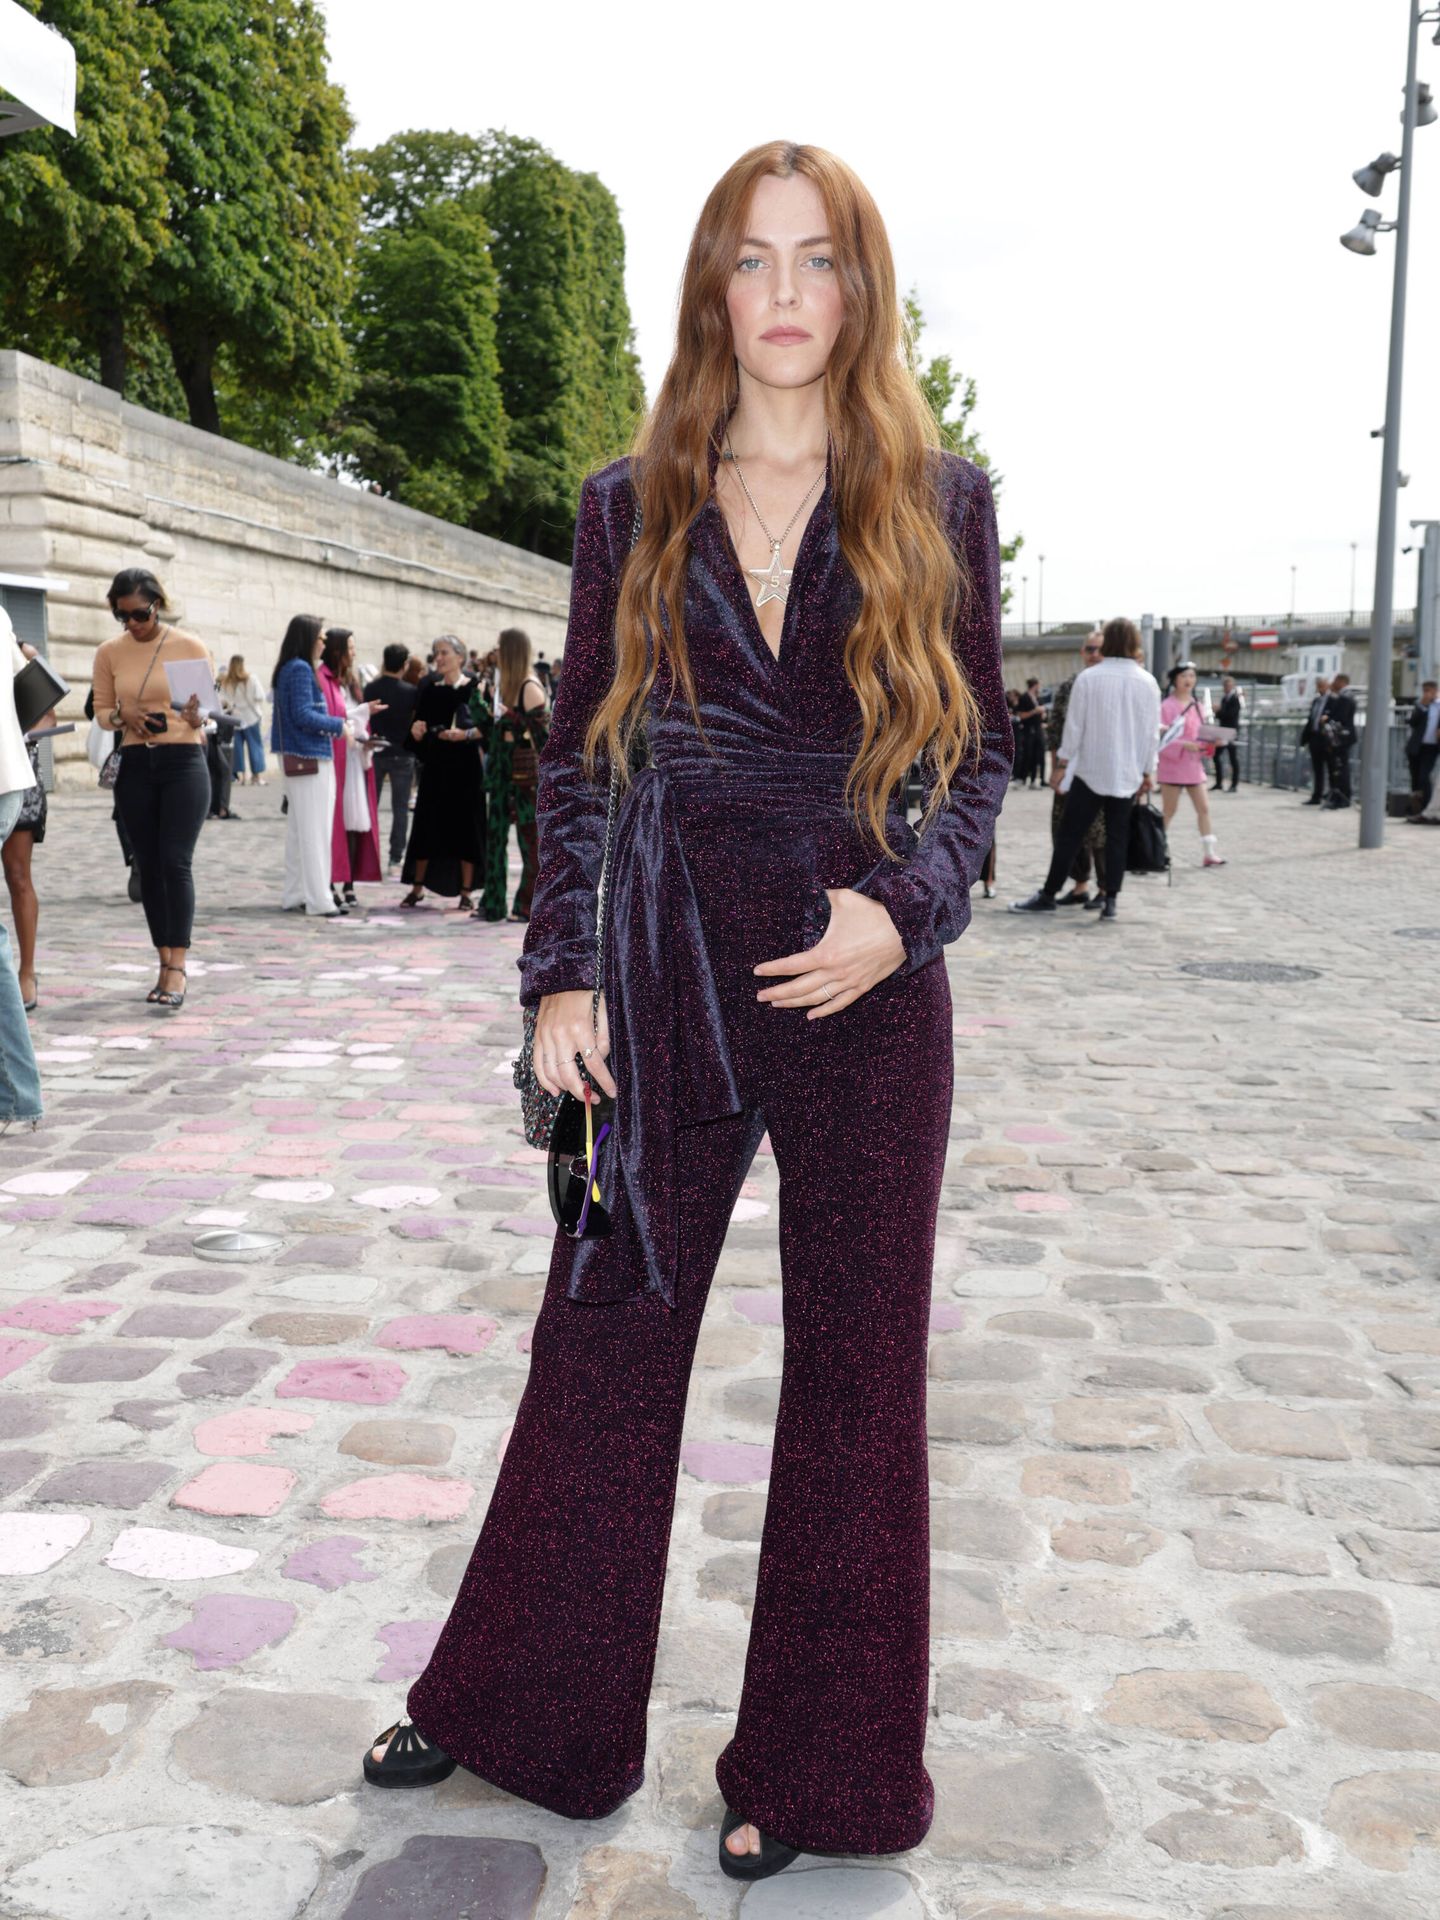 Riley Keough. (Getty Images)